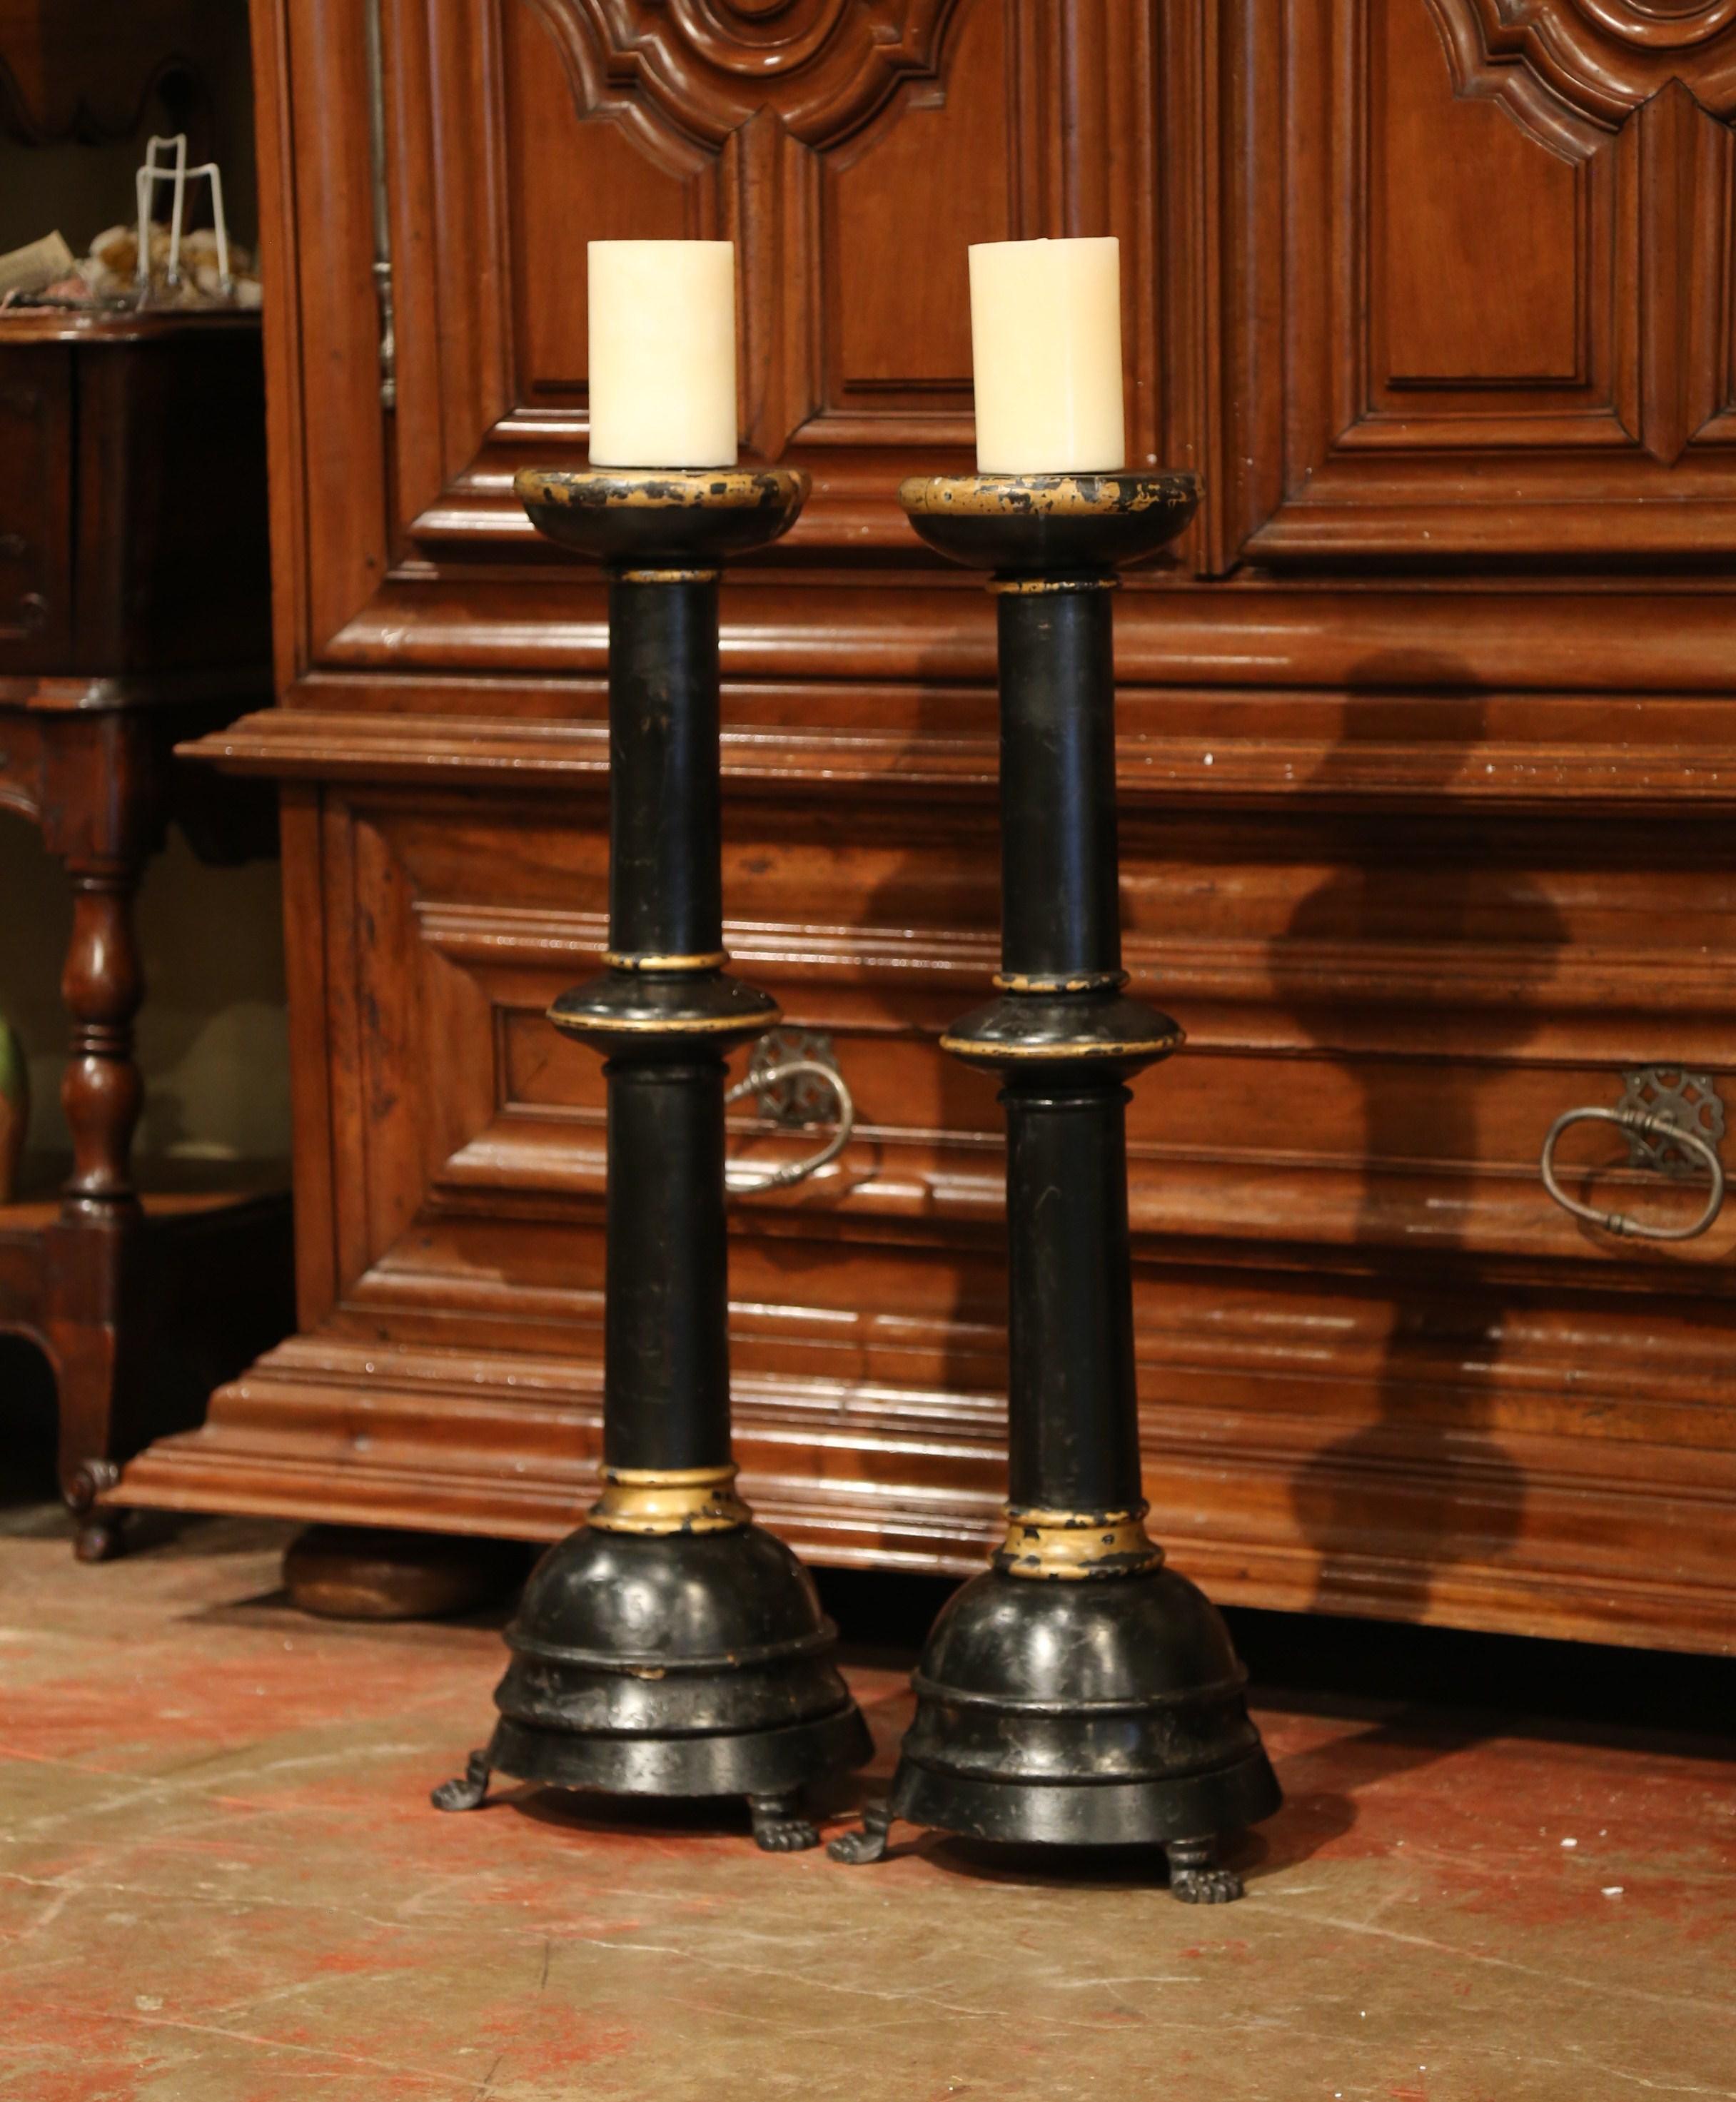 Decorate your mantel or entry console with these important antique altar sticks. Crafted in Italy, circa 1860, each tall candlestick stands on three hand carved paw feet and features a turned stem and wooden pricket at the top to hold a candle. Both